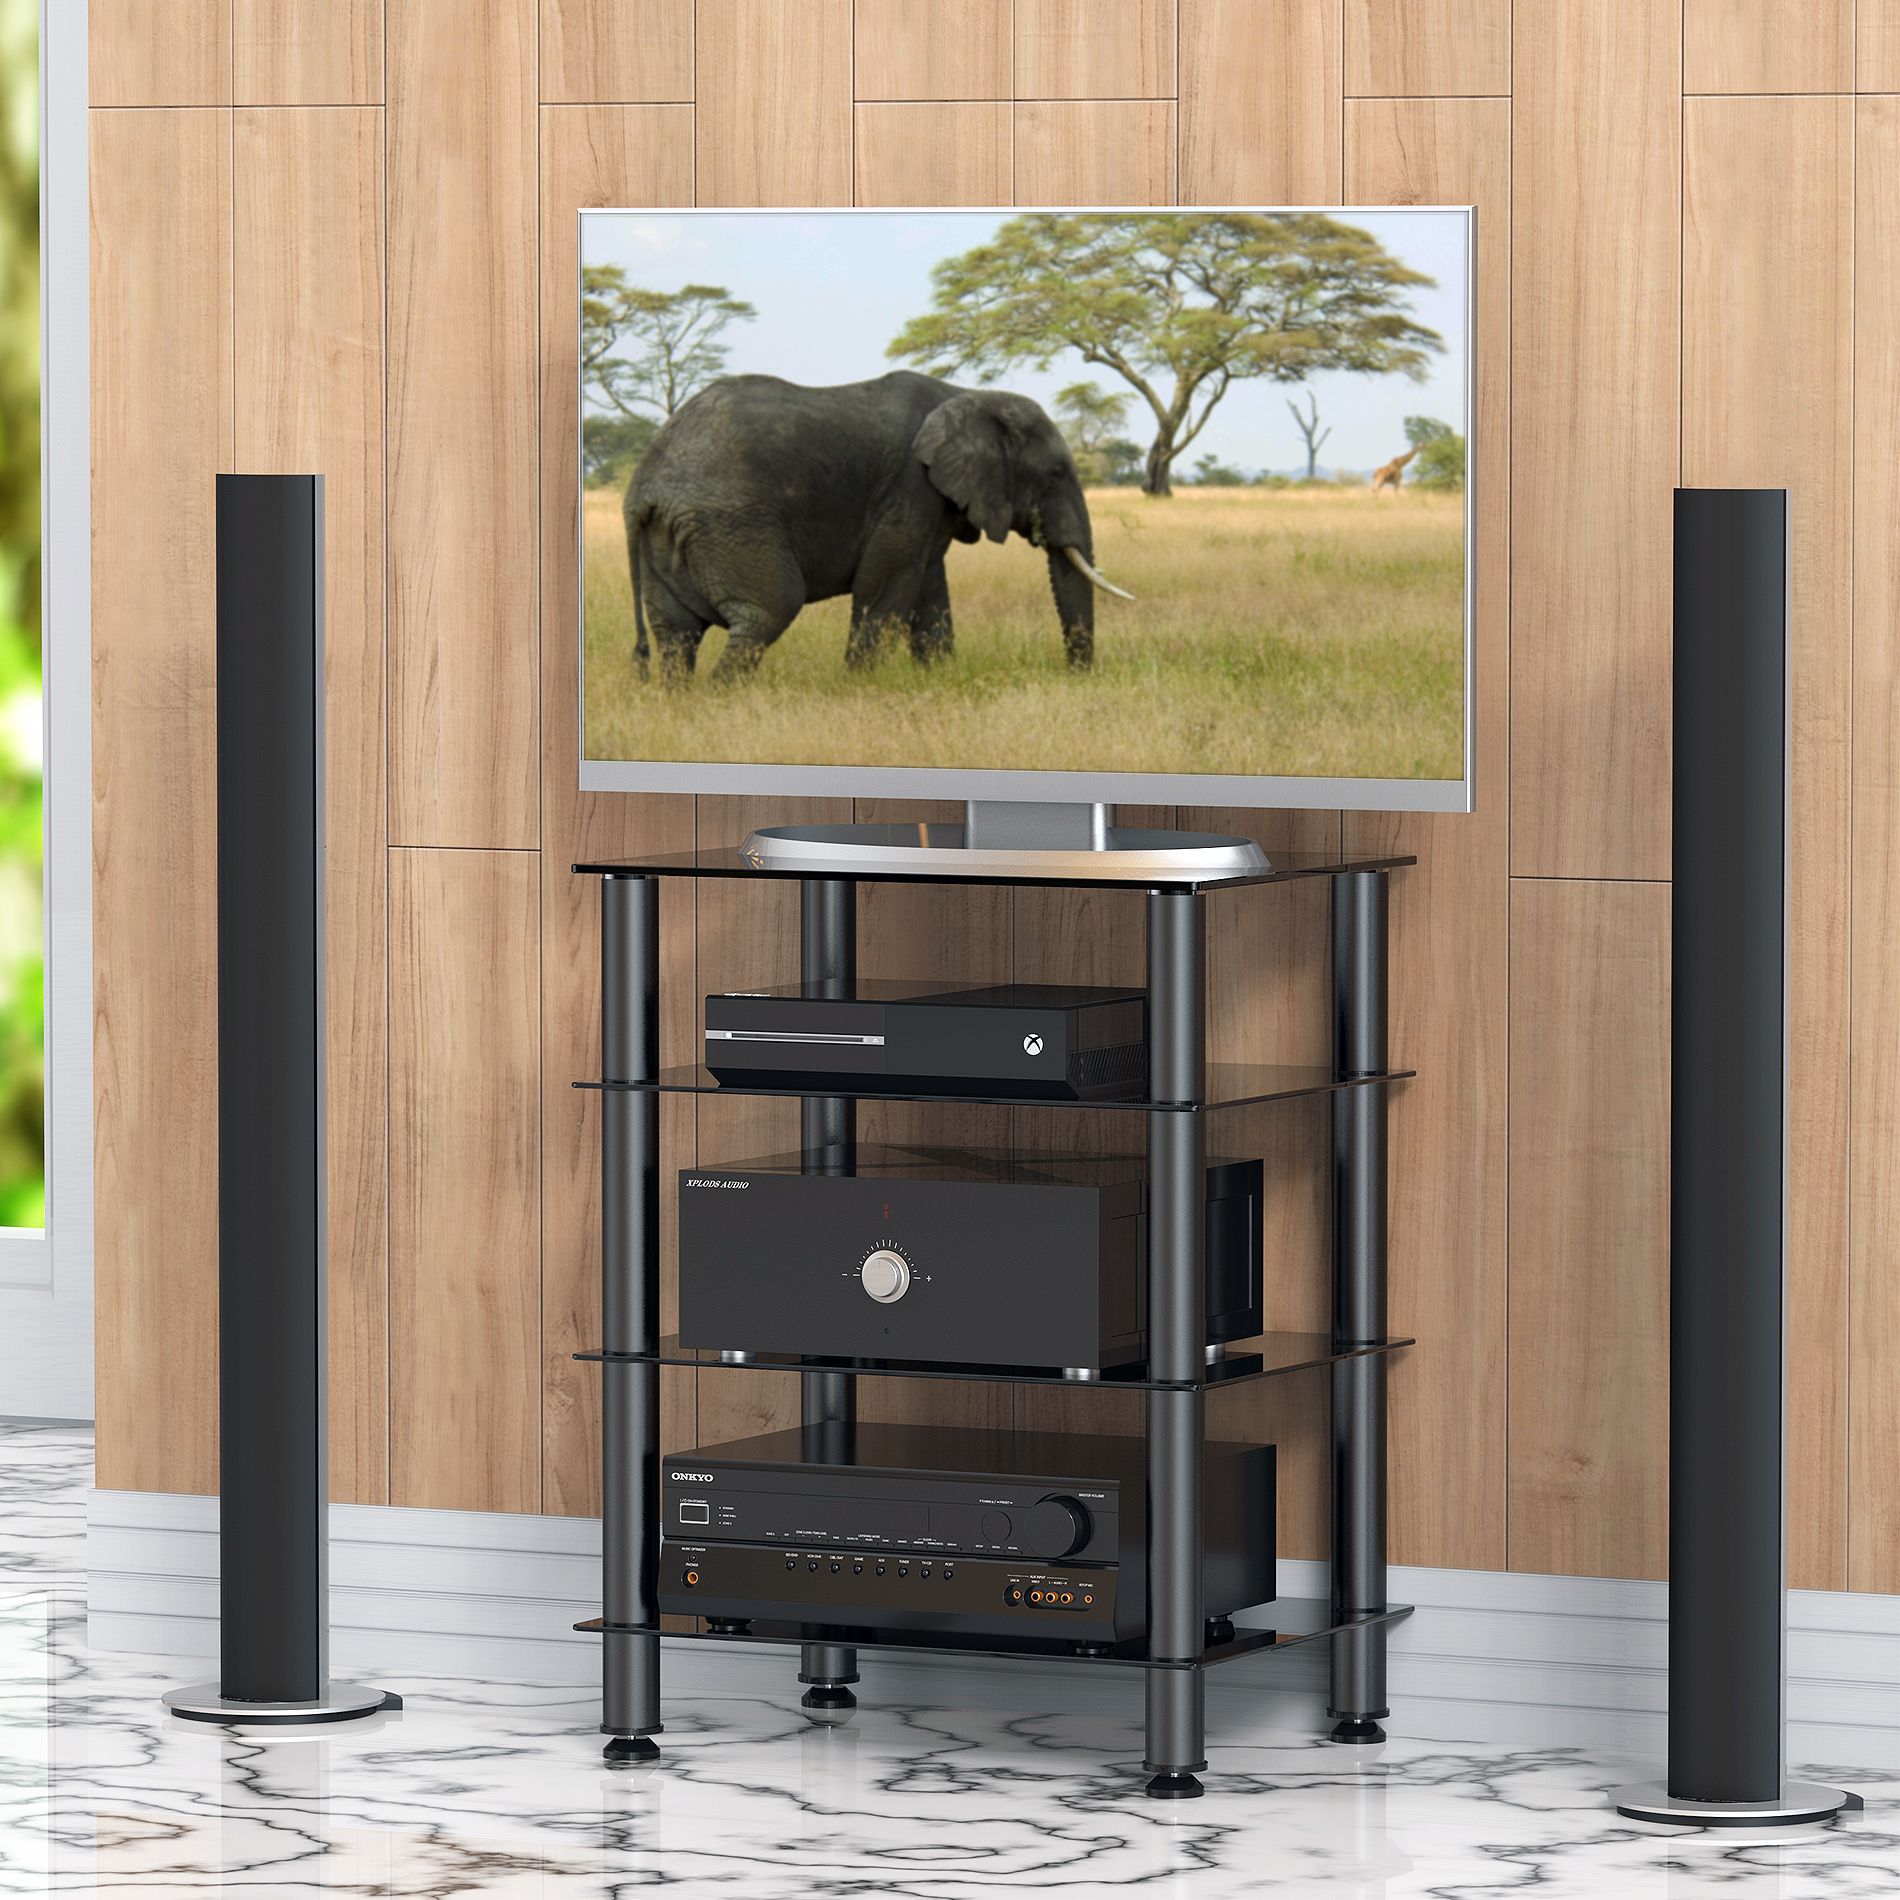 Fitueyes 4-tier Media Stand Audio/Video Component Cabinet with Glass Shelf for /Apple Tv/xbox One/ps4 - image 1 of 1